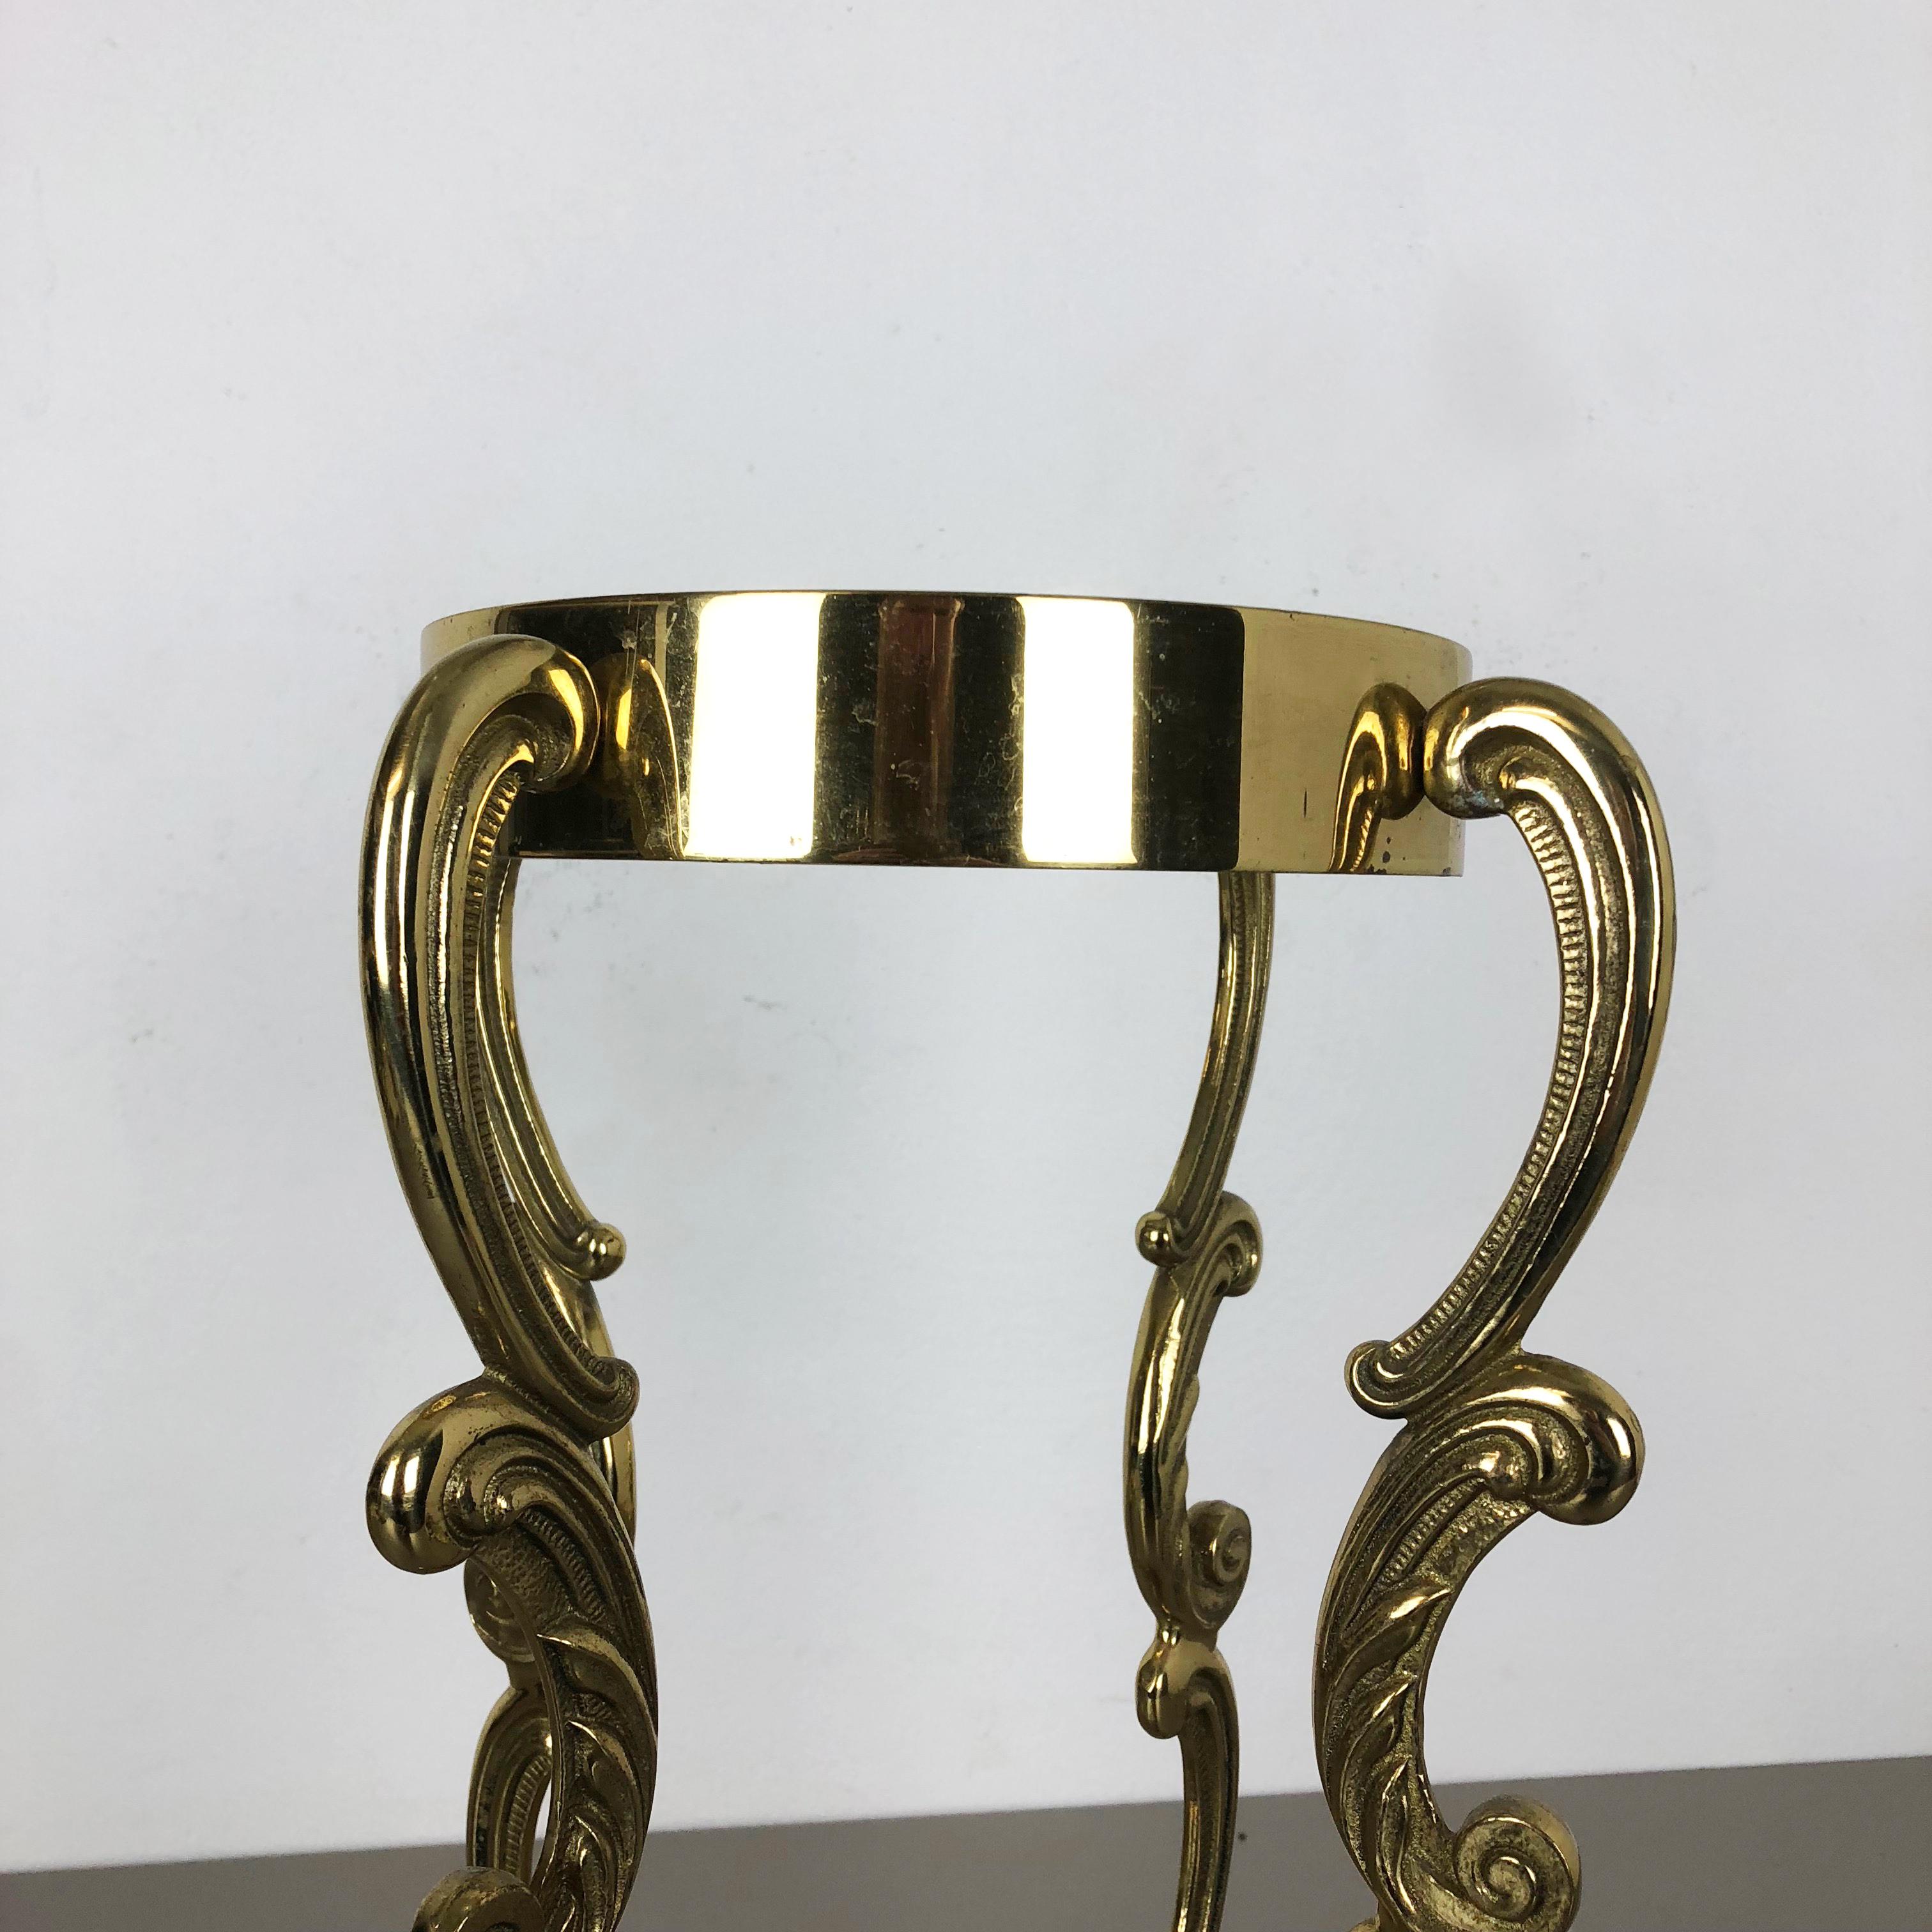 Original Hollywood Regency Solid Brass Umbrella Stand, Italy, 1970s For Sale 5